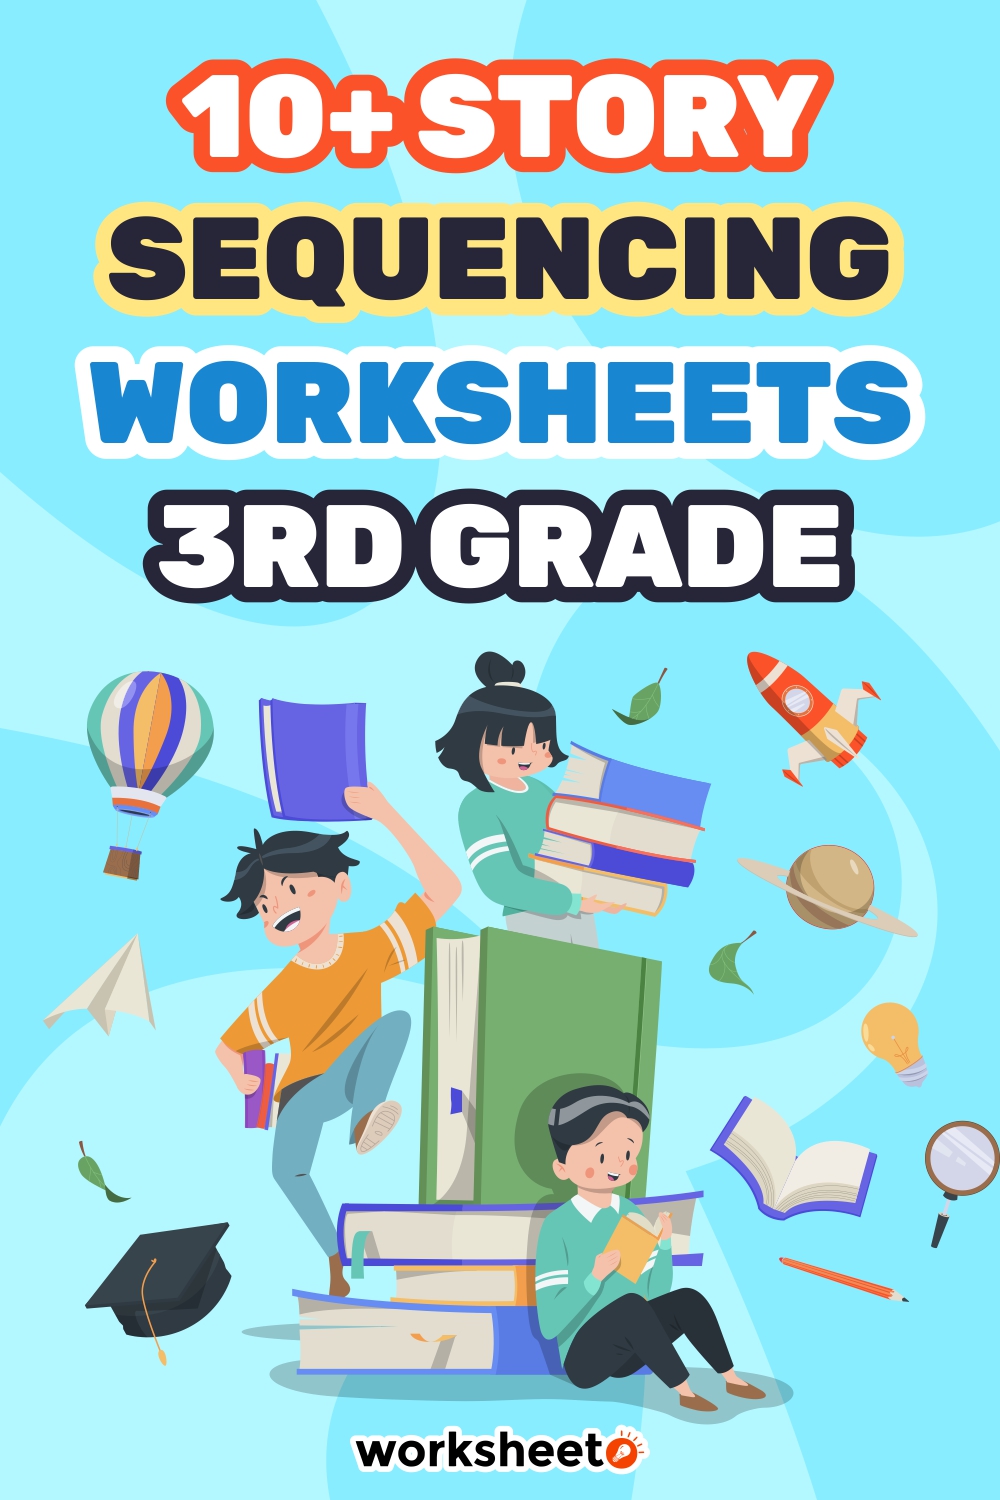 14 Images of Story Sequencing Worksheets 3rd Grade